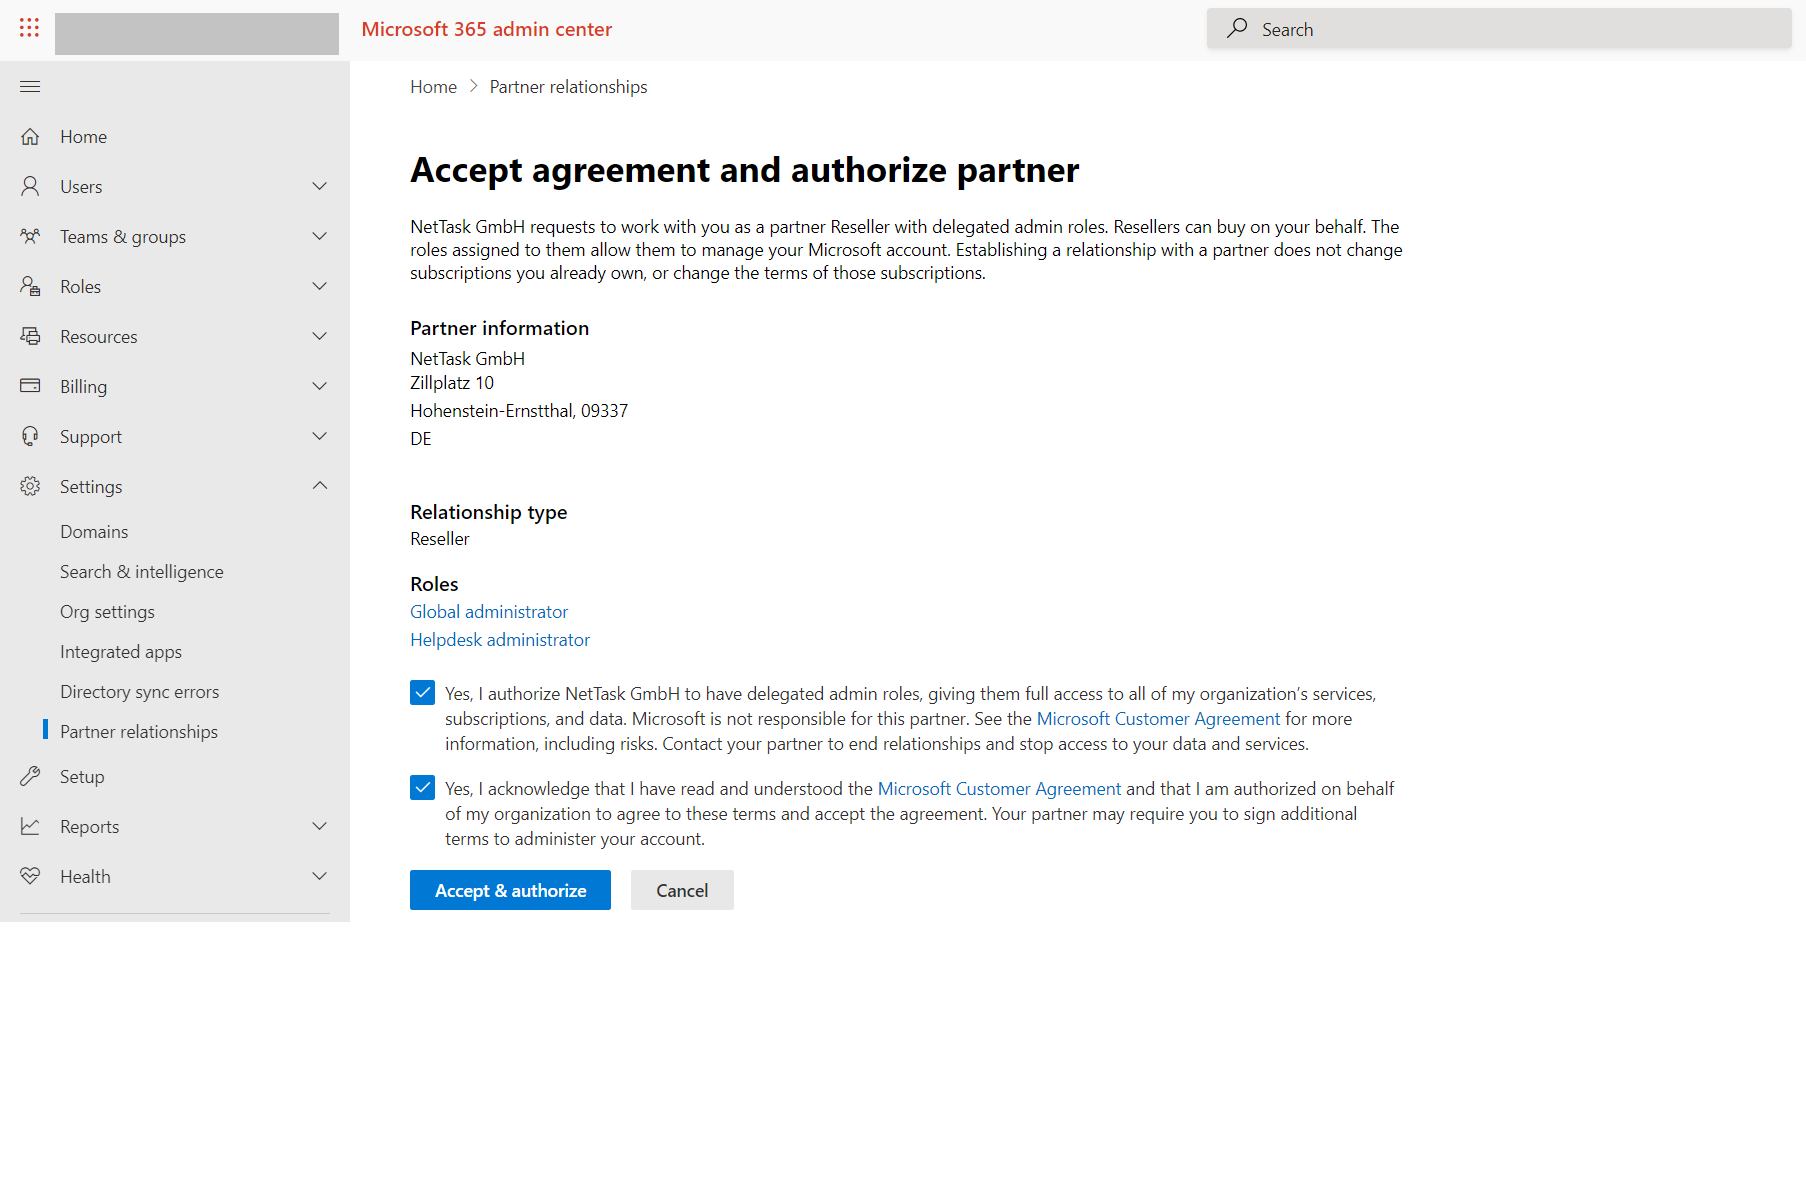 Accept agreement and authorize partner